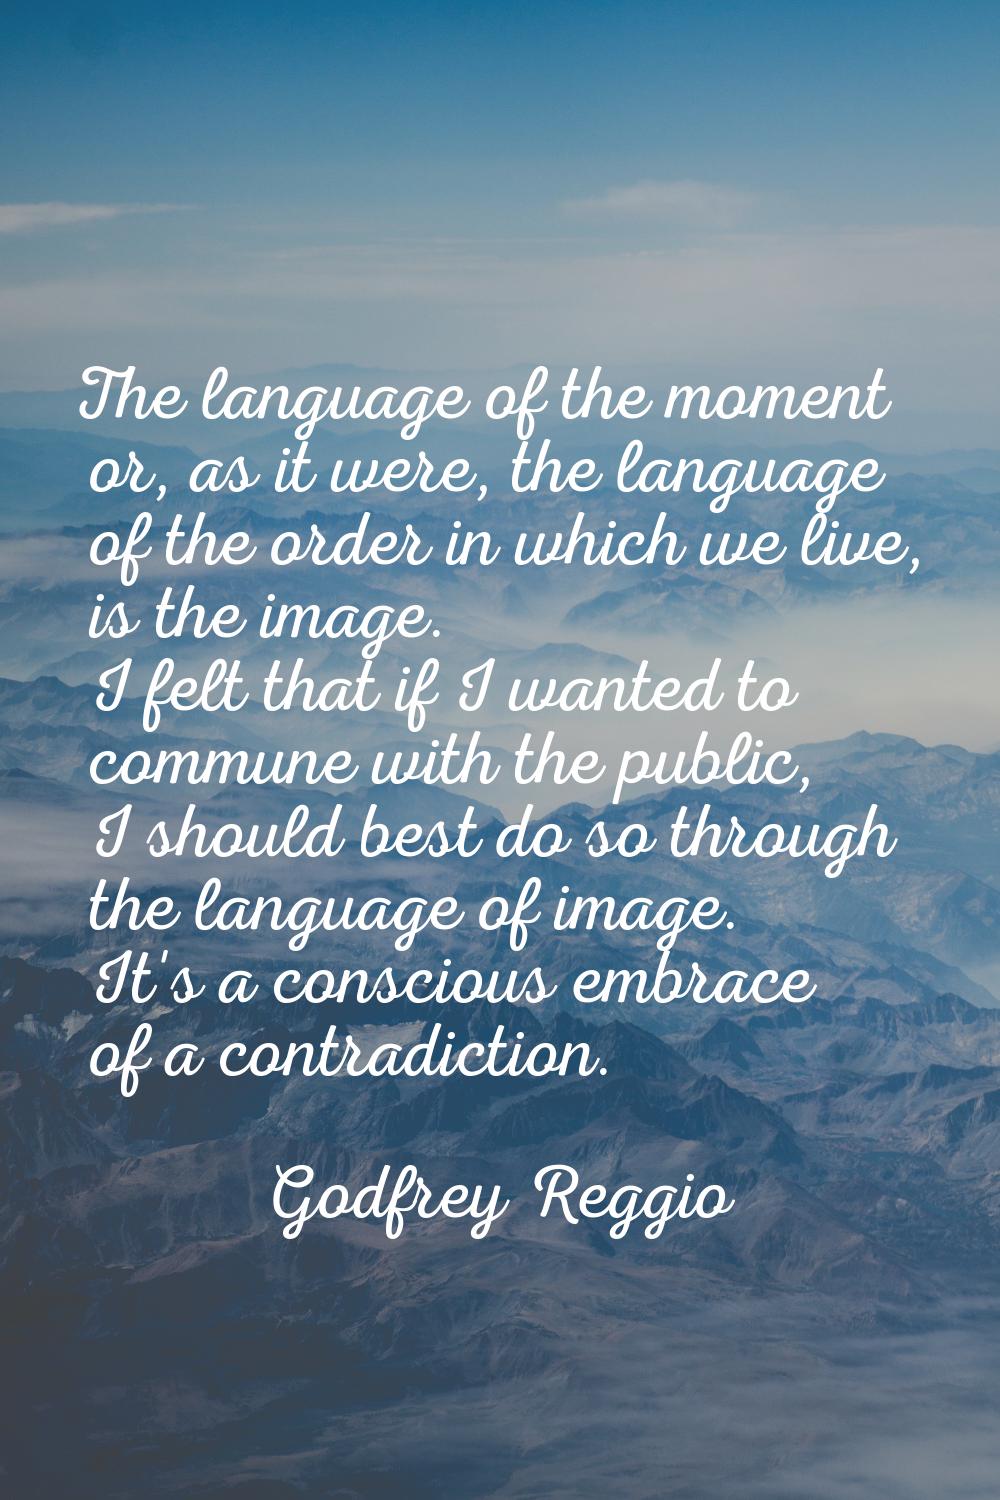 The language of the moment or, as it were, the language of the order in which we live, is the image